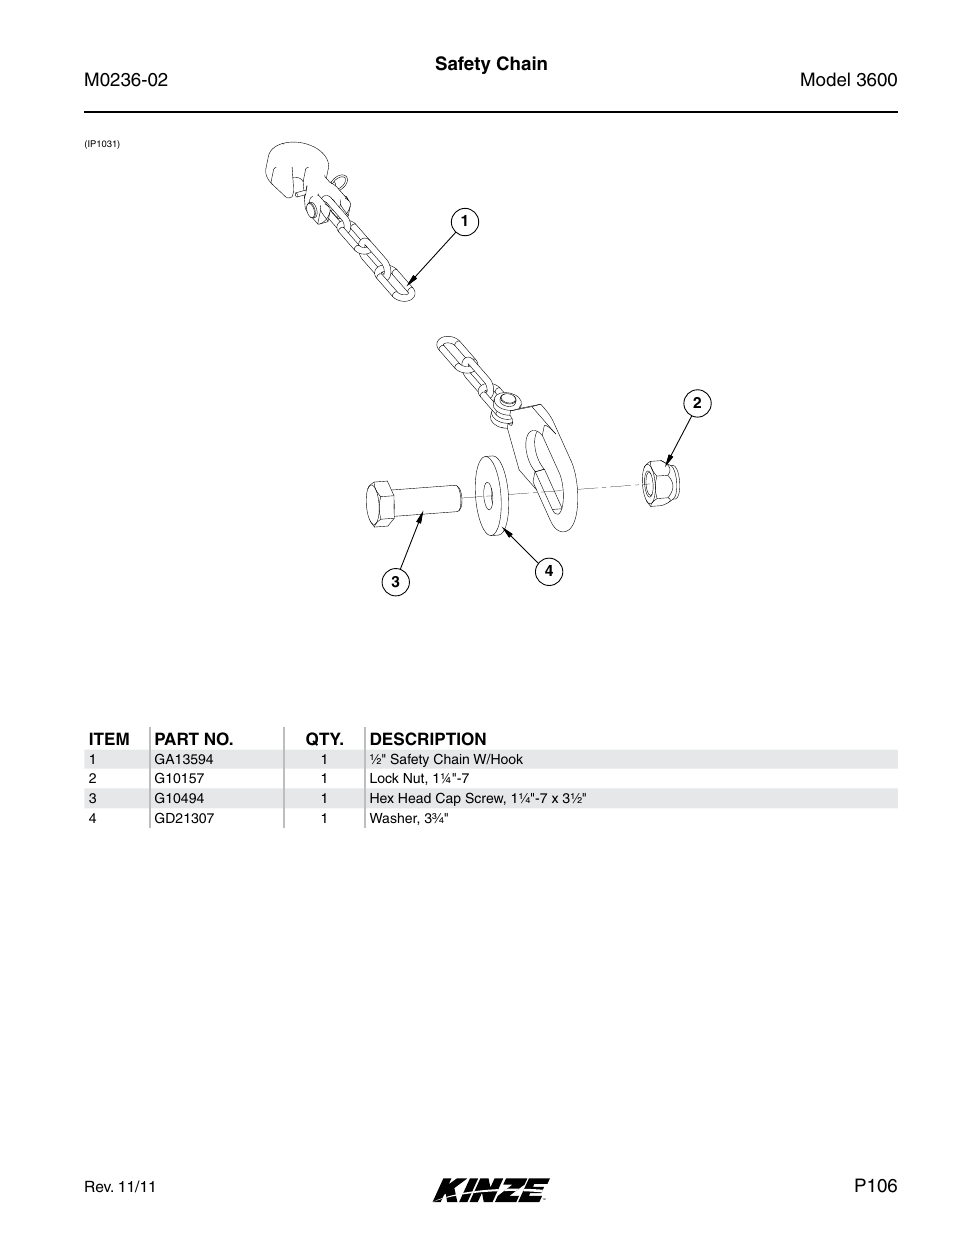 Safety chain, P106 | Kinze 3600 Lift and Rotate Planter Rev. 5/14 User Manual | Page 109 / 302